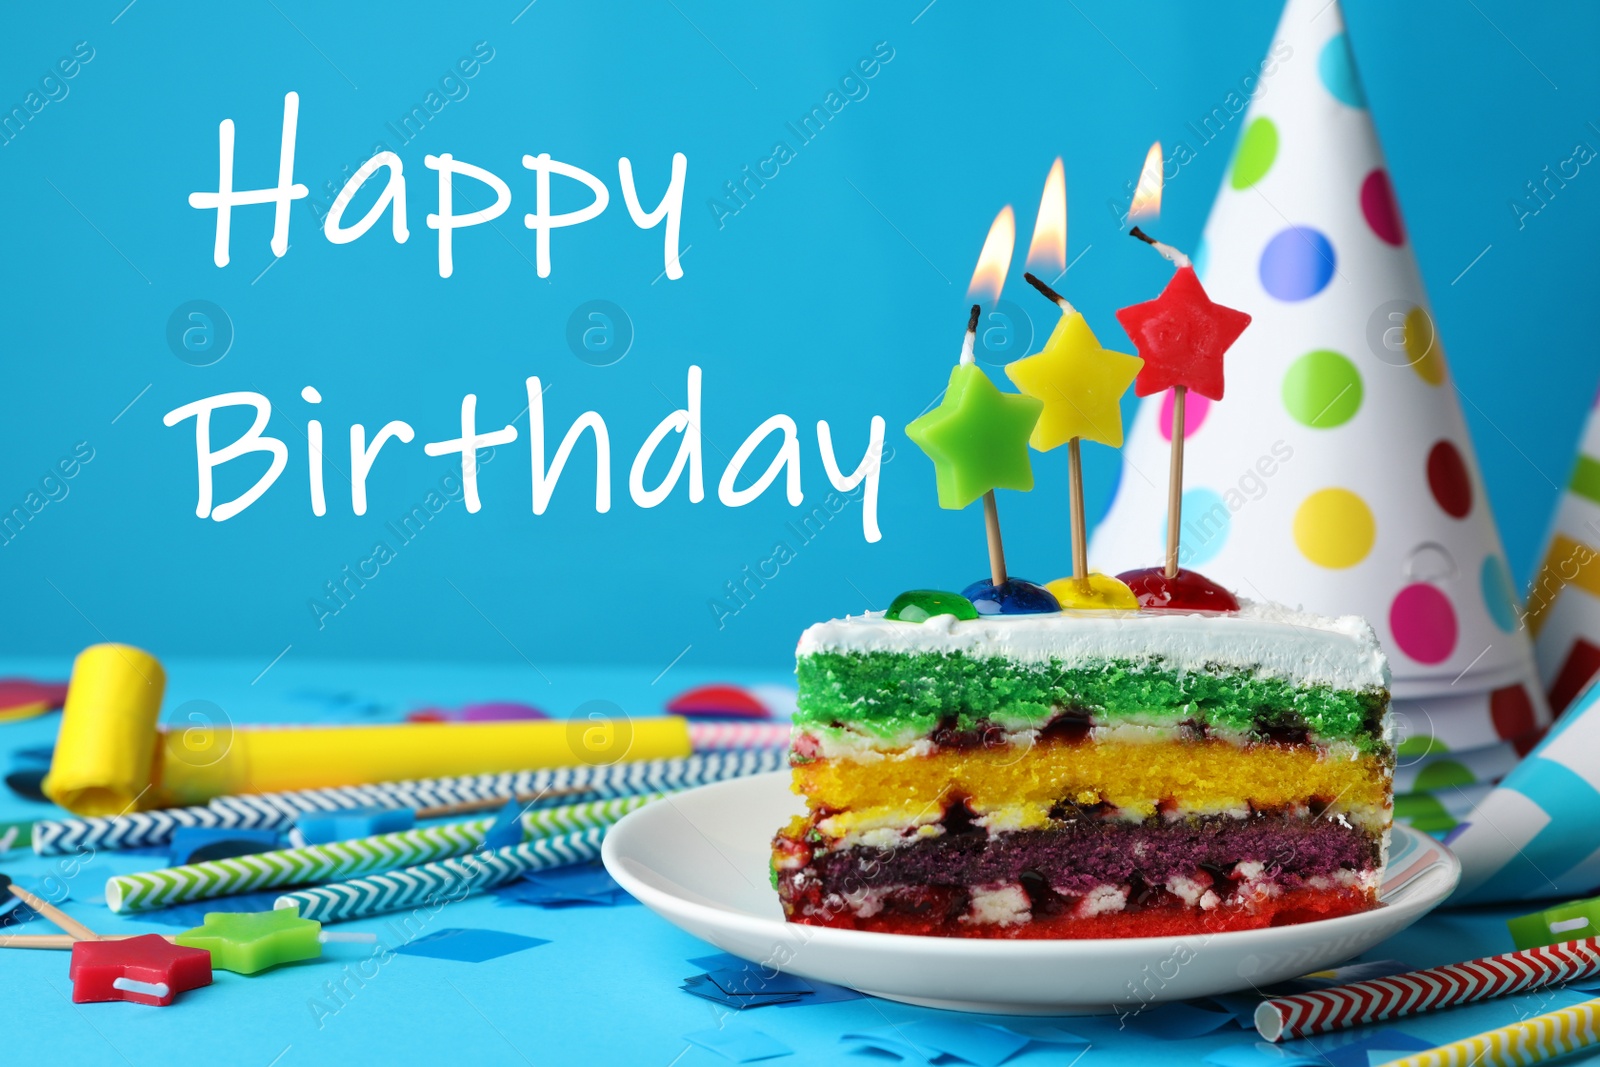 Photo of Piece of cake with candles and text Happy Birthday on light blue background